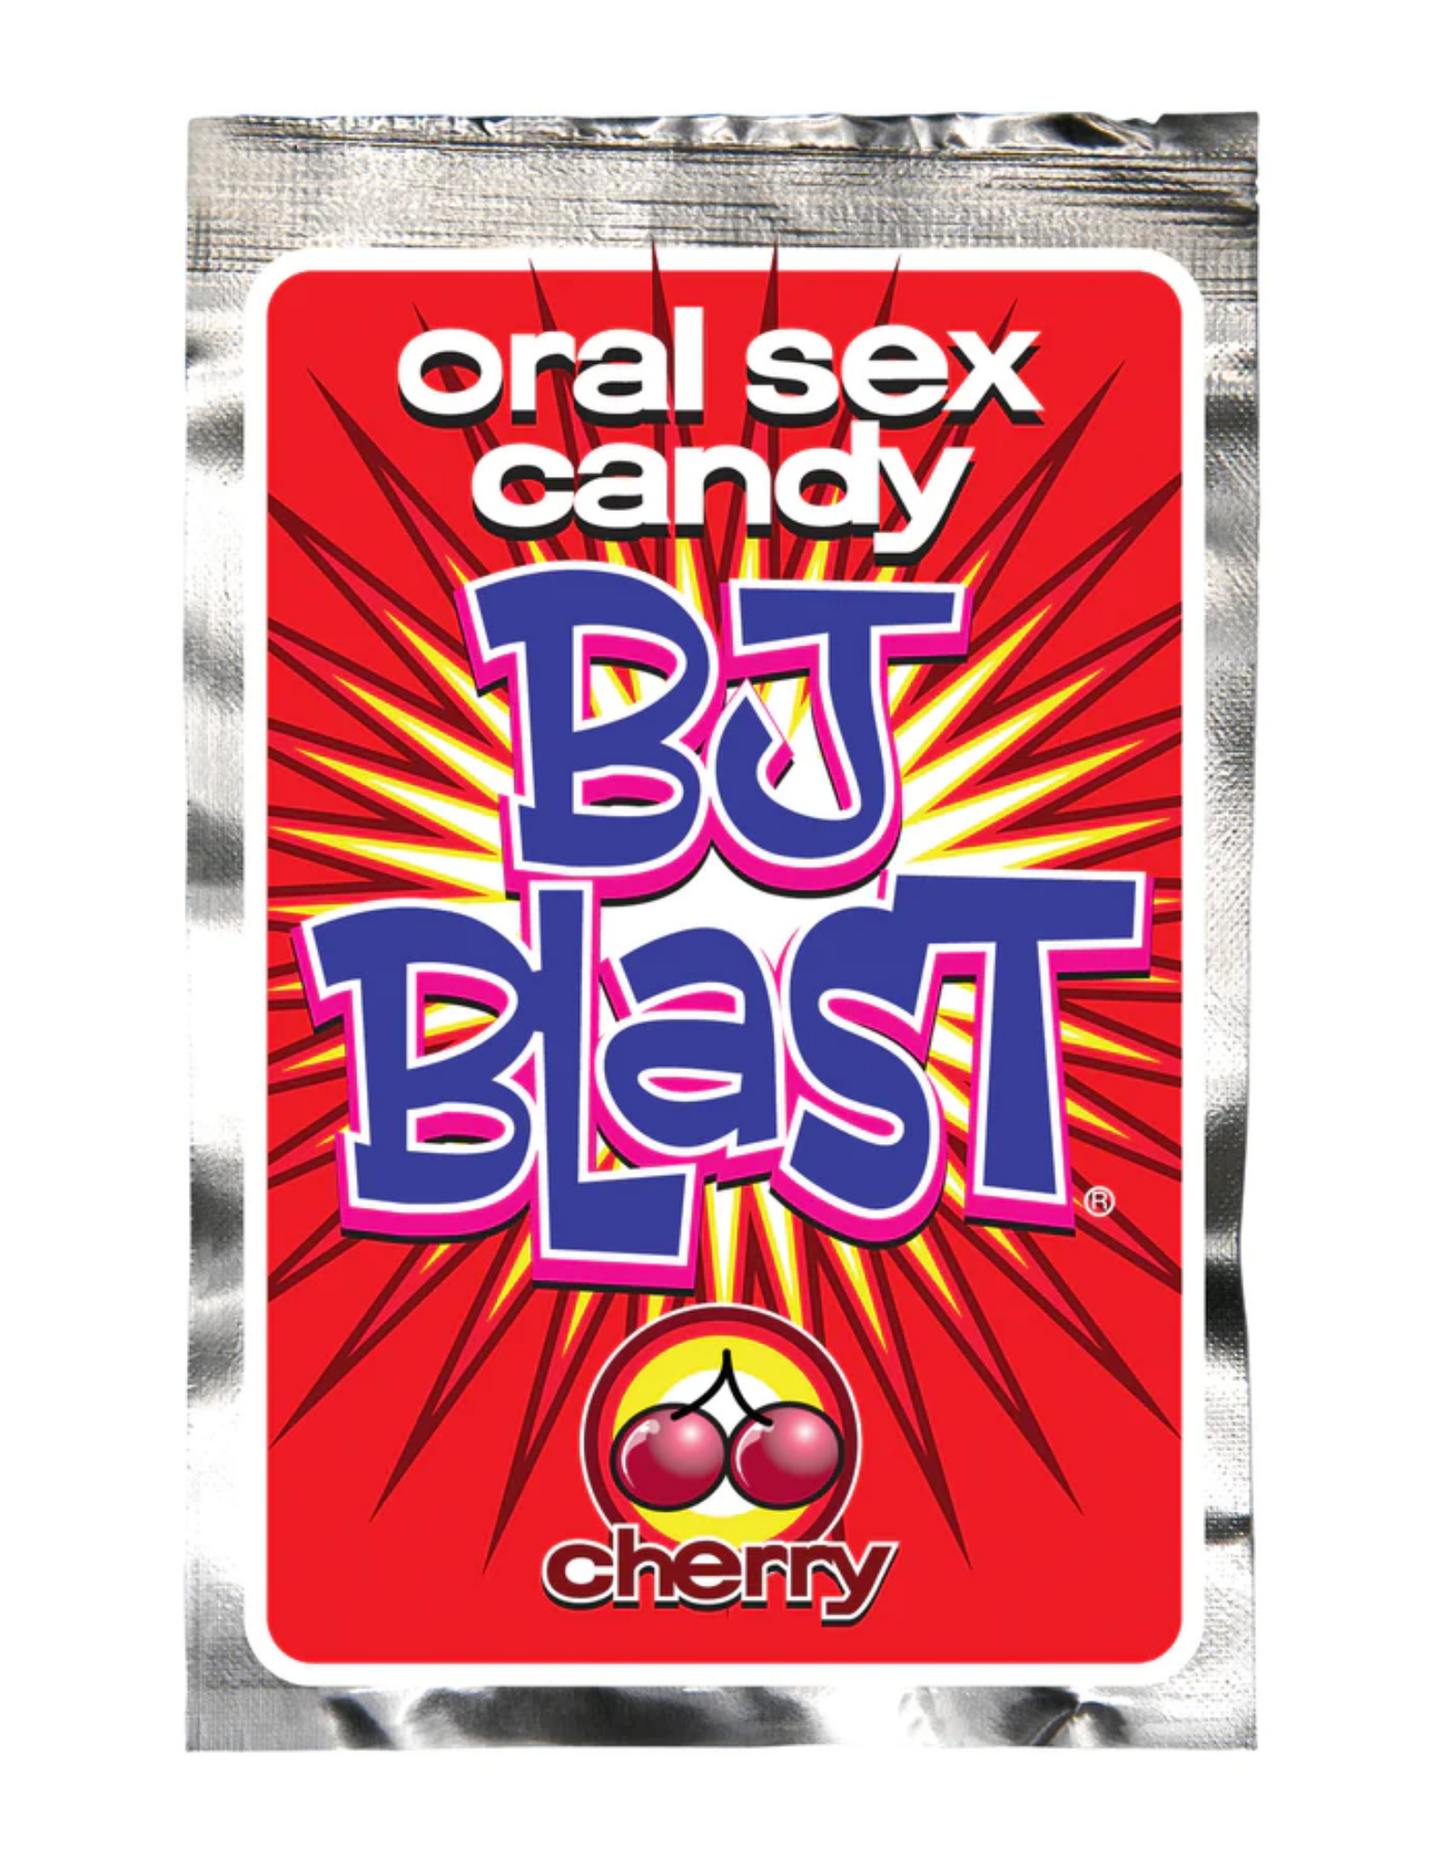 Photo shows the Cherry flavor BJ Blast Oral Sex Candy from Pipedreams.